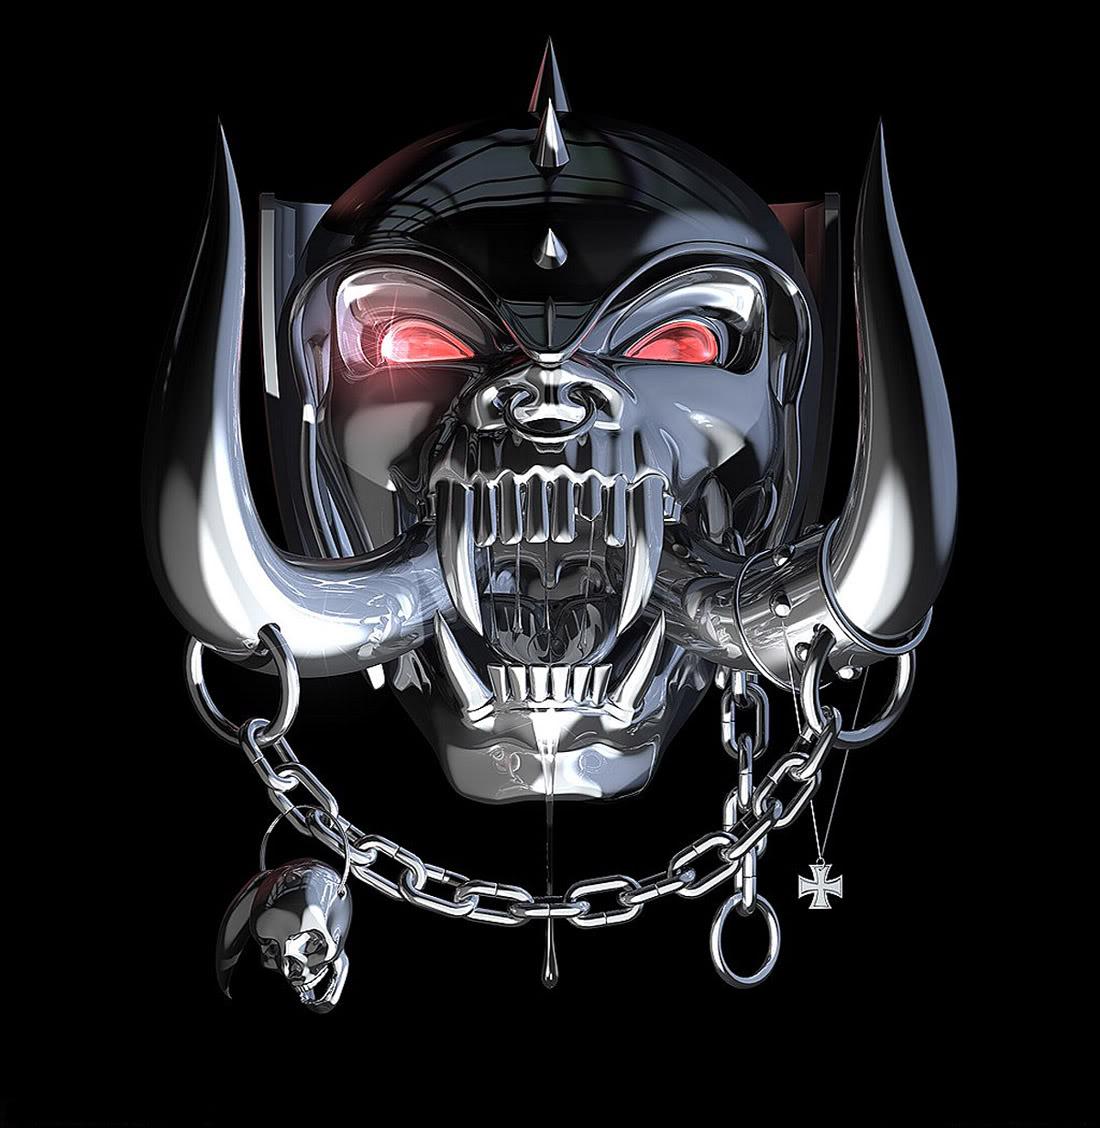 MOTÖRHEAD – To Release “Live At Montreux Jazz Festival 2007” In June